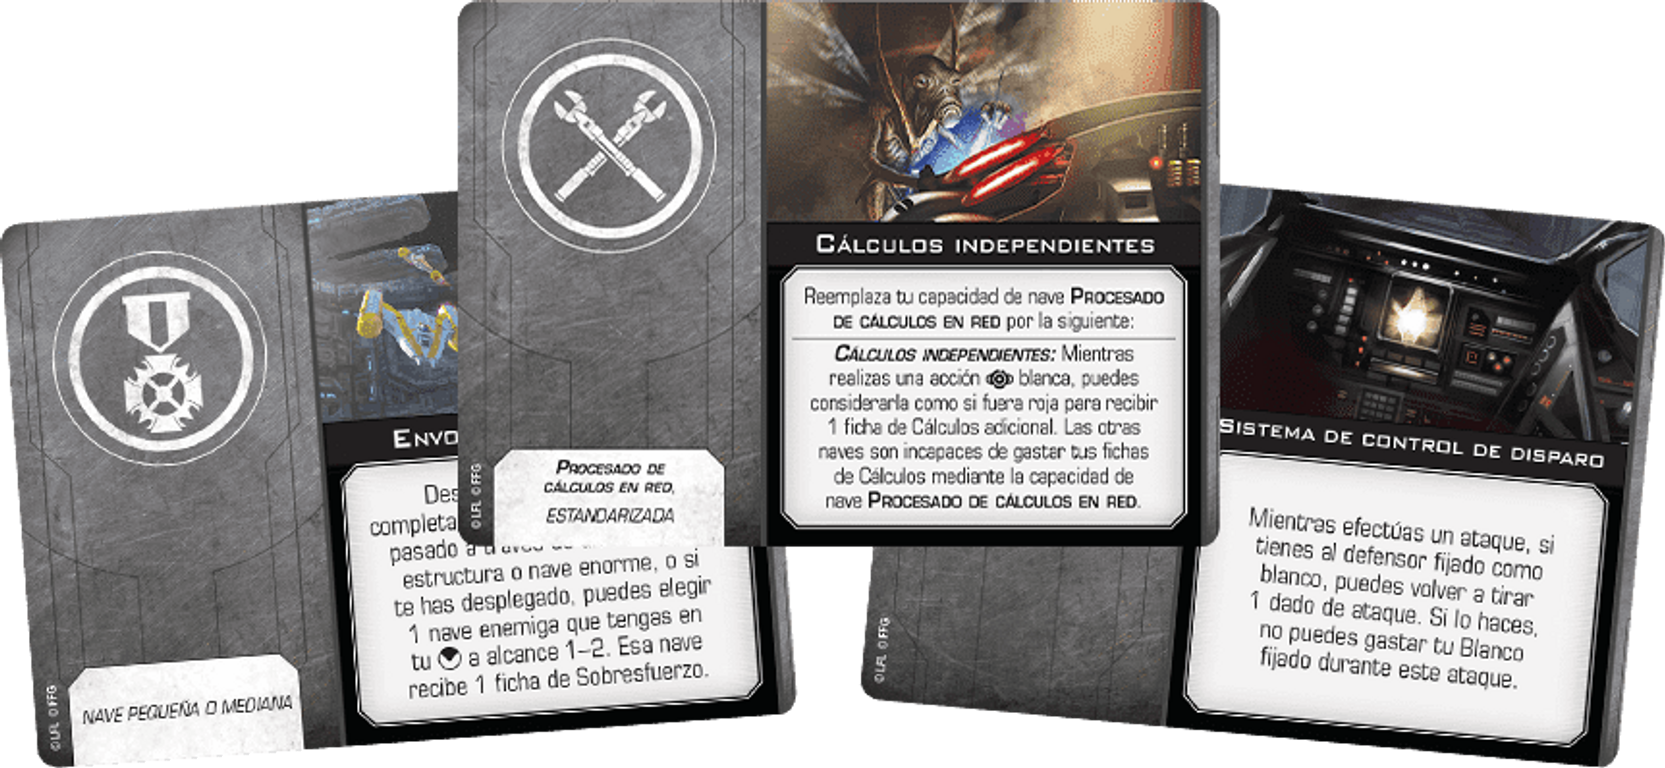 Star Wars: X-Wing (Second Edition) – Droid Tri-Fighter Expansion Pack cards